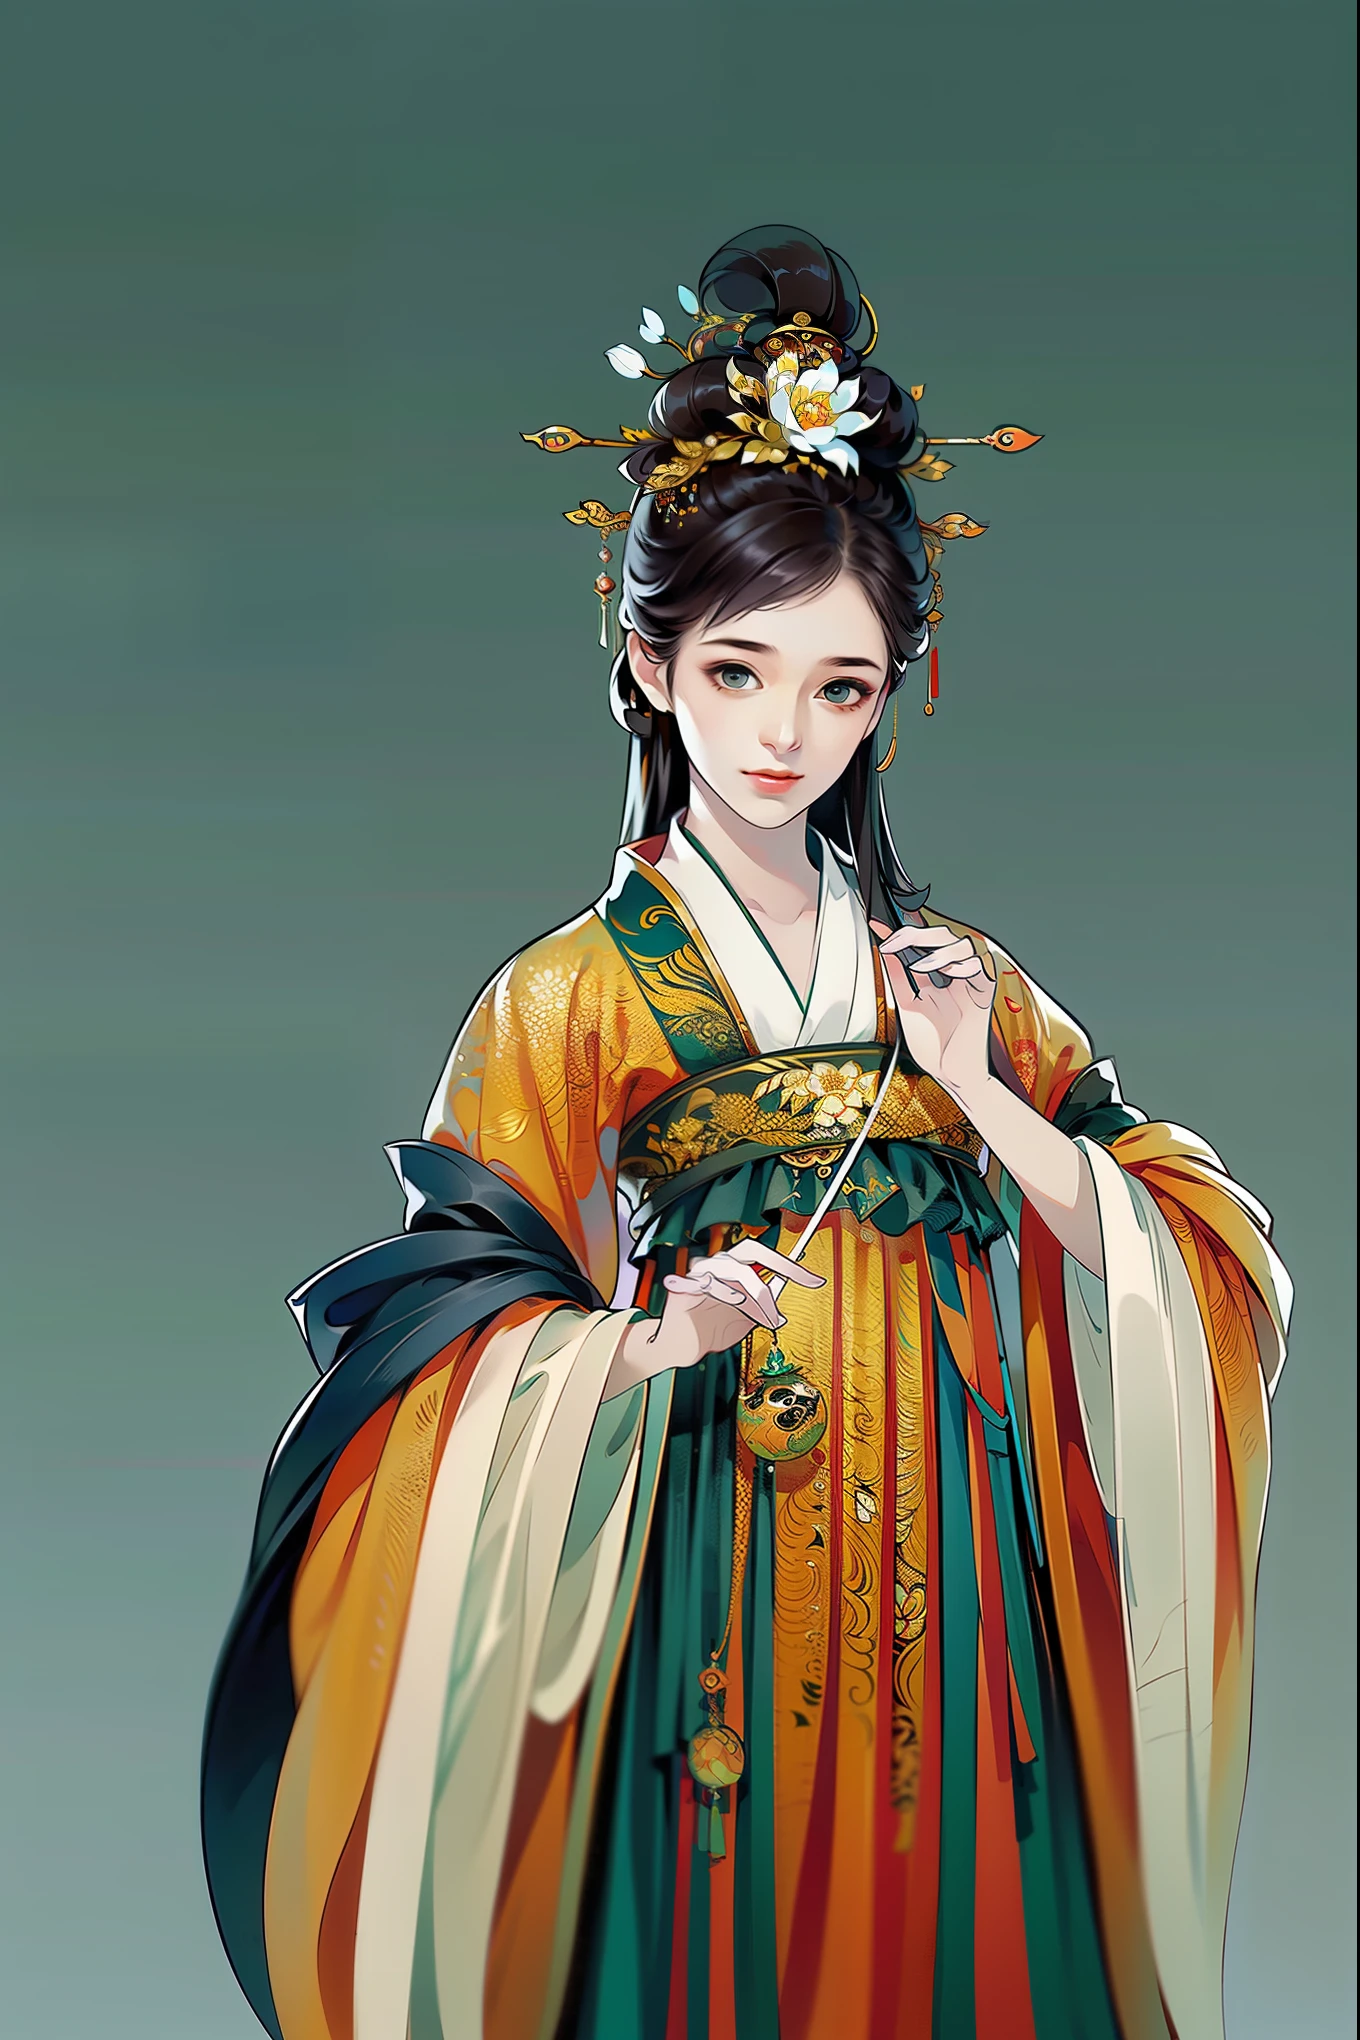 （masterpiece，super detailed，HD details，highly detailed art）1 girl，Half body，xianxia，monochrome，monotonous，elegant，Highly detailed character designs from East Asia，Game character costume design，simple，ultra high resolution, sharp focus, epic work, masterpiece, (Very detailed CG unified 8k wallpaper)，pretty face，beautiful eyes，HD details